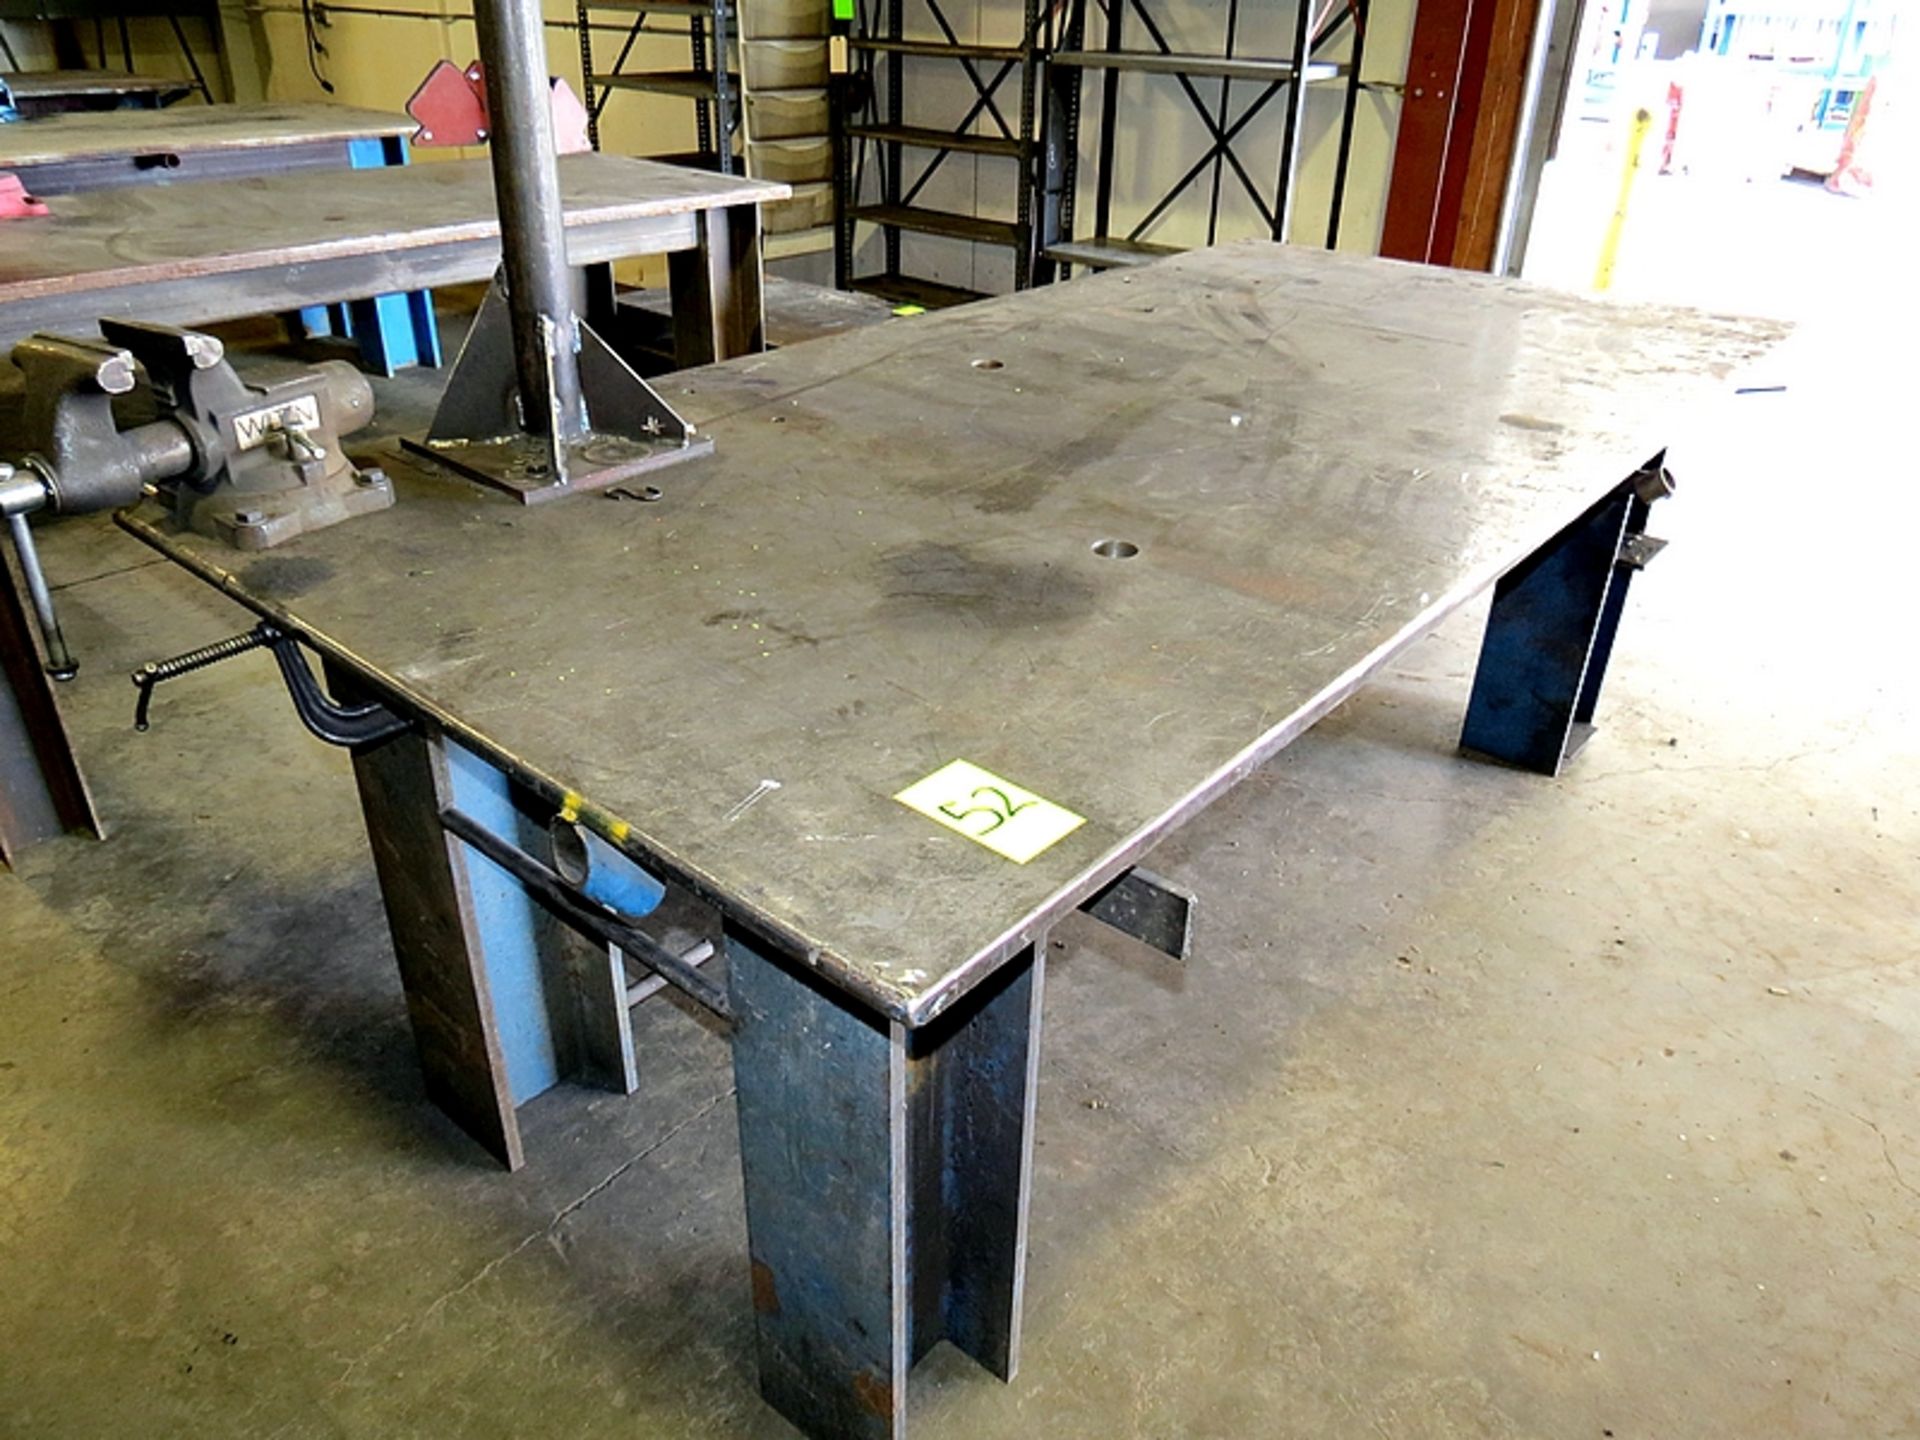 8X4X3 STEEL WELDING TABLE WITH VISE AND HOIST ARM - Image 2 of 2